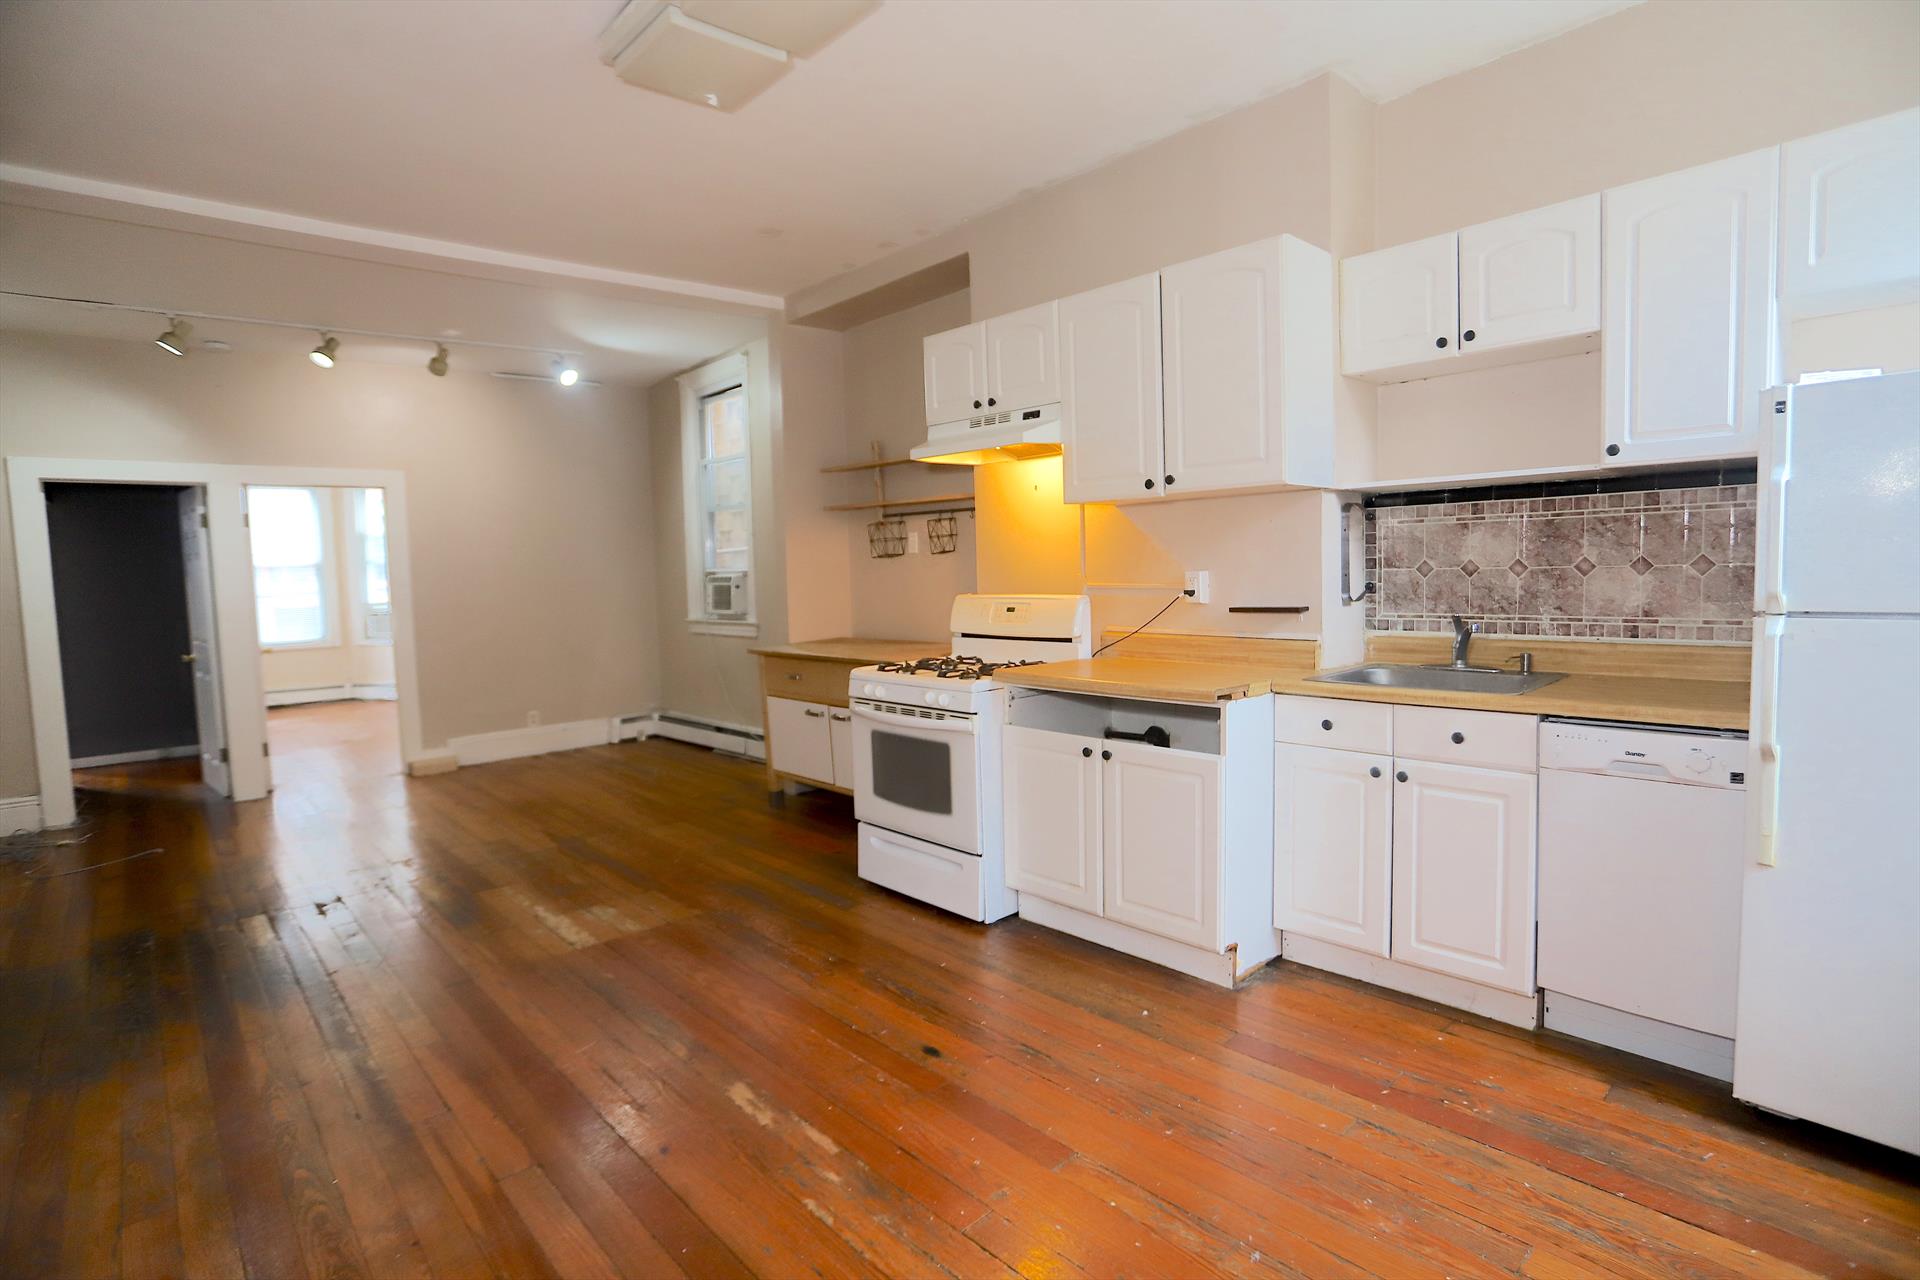 Sunny 3 Bed 1 Bath in great location featuring hardwood floors, dishwasher, lots of natural light, open floor plan.  Shared backyard. Close to all mass transit, shopping, nightlife, restaurants, parks, schools, houses of worship, and more! 